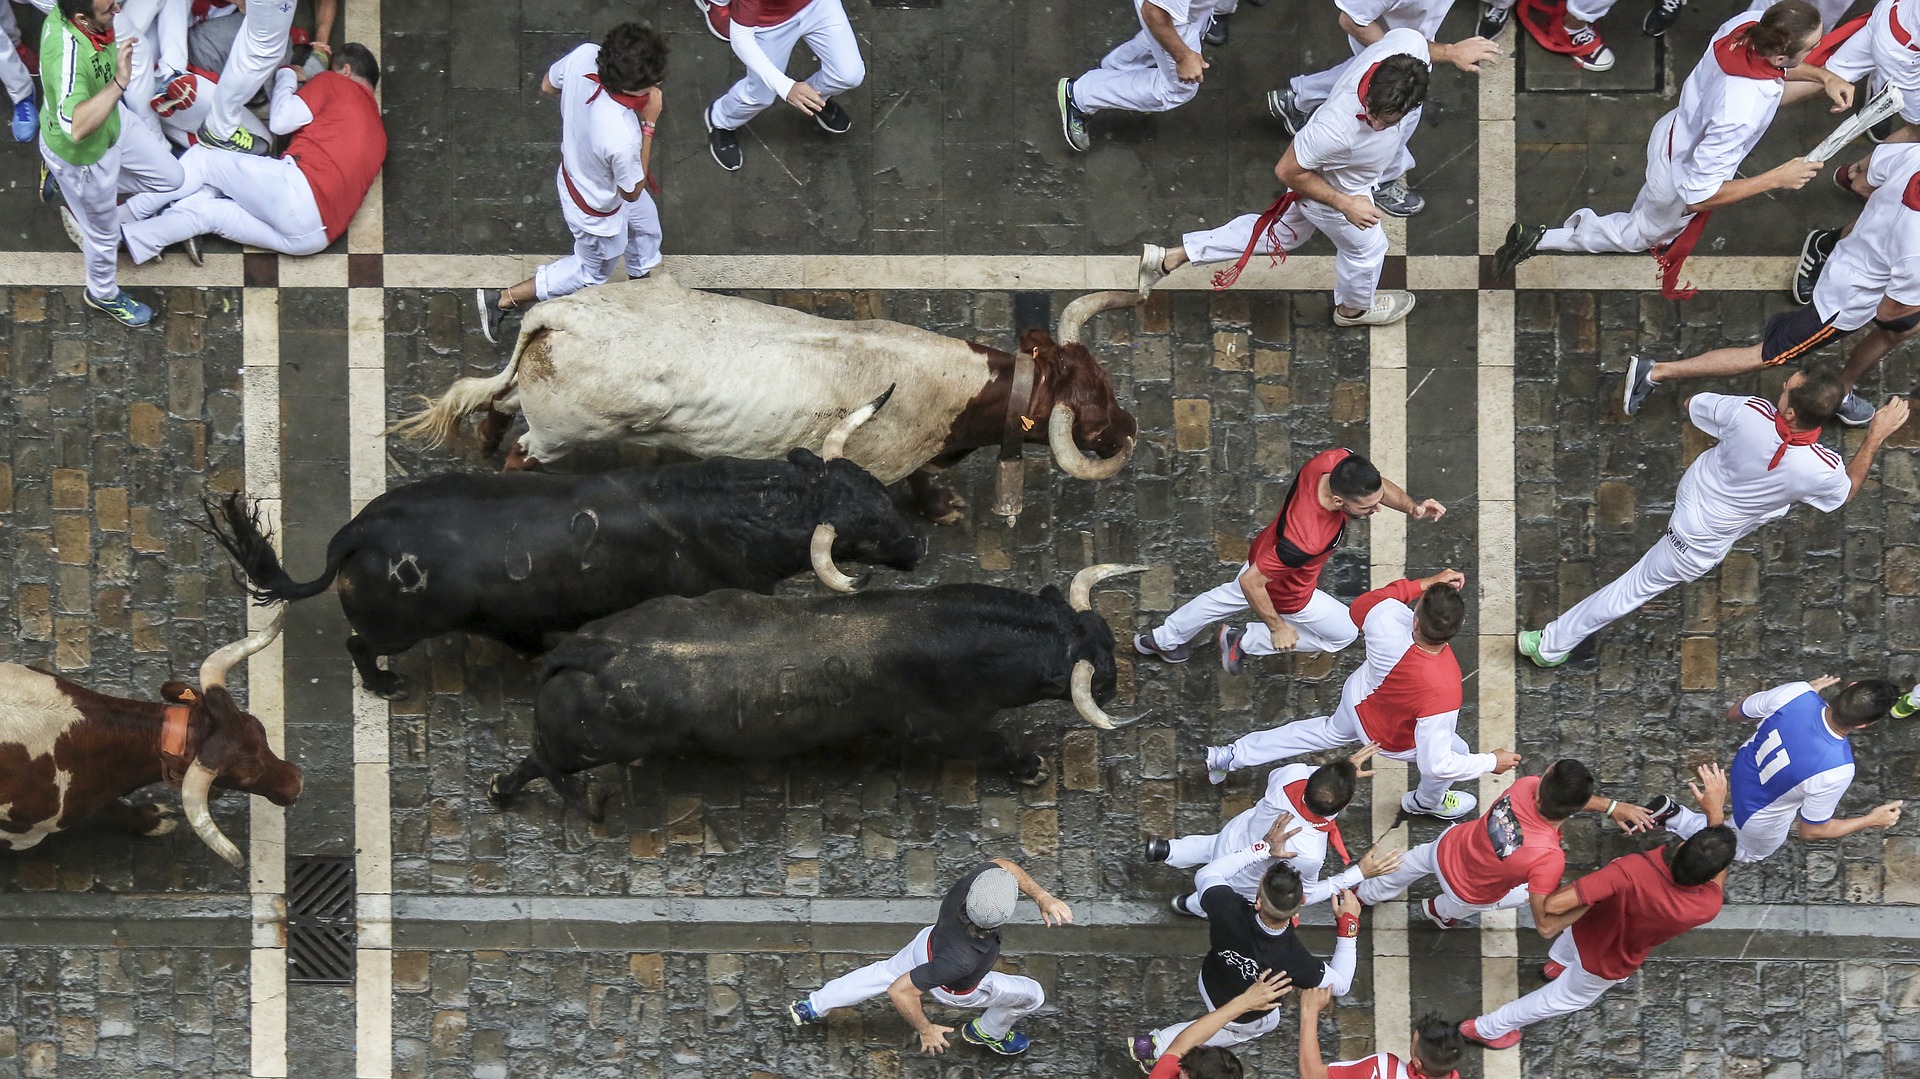 Fancy dress at the Running of the Bulls 